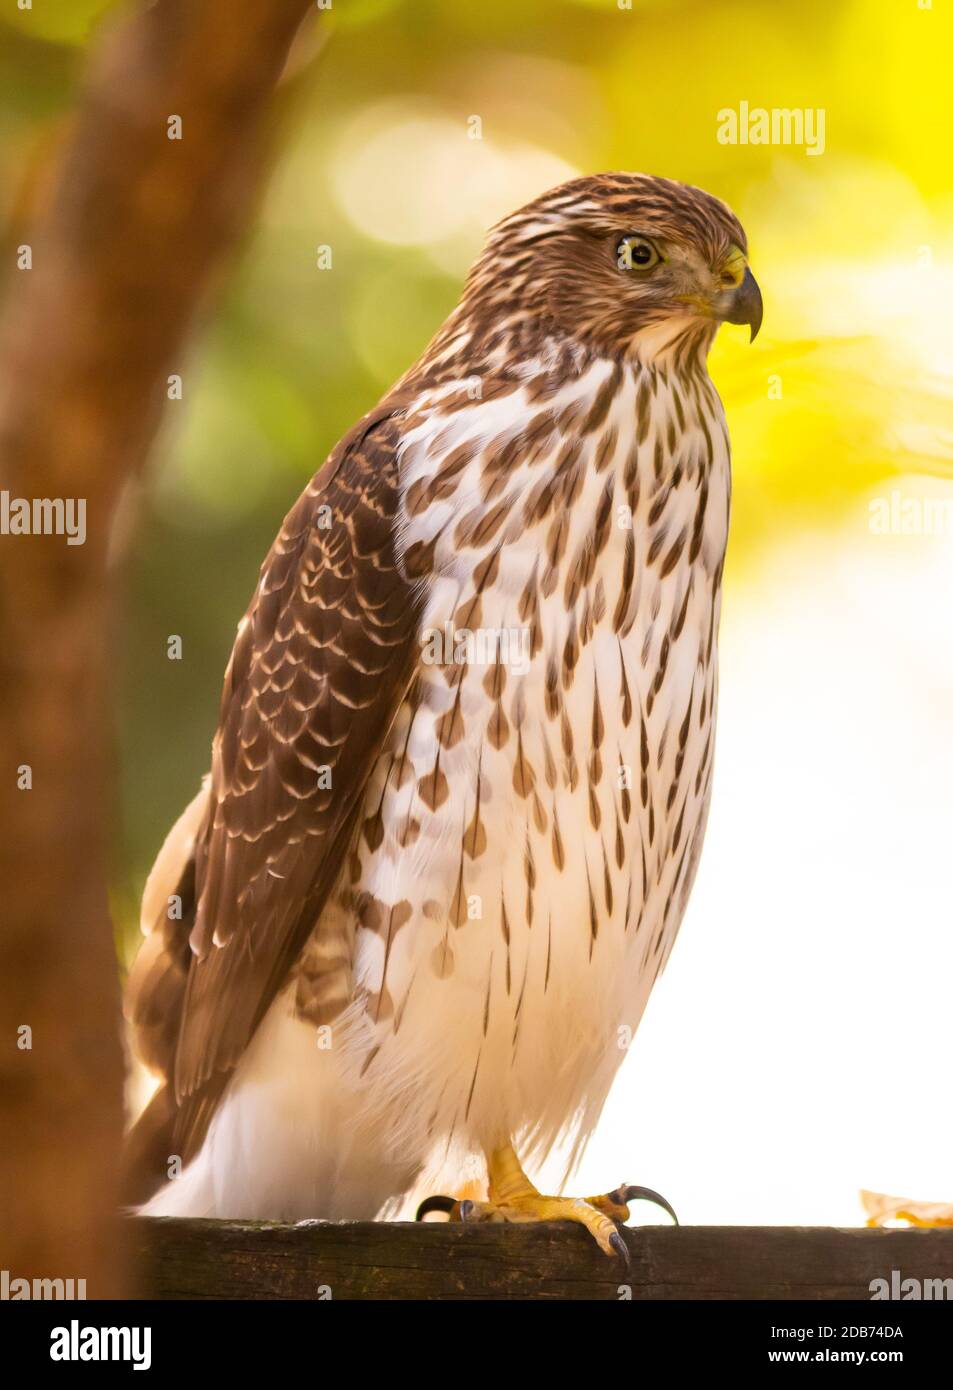 ARLINGTON, VIRGINIA, USA, OCTOBER 9, 2020 - Juvenile Cooper's Hawk perched on fence in residential neighborhood. Accipiter cooperii Stock Photo